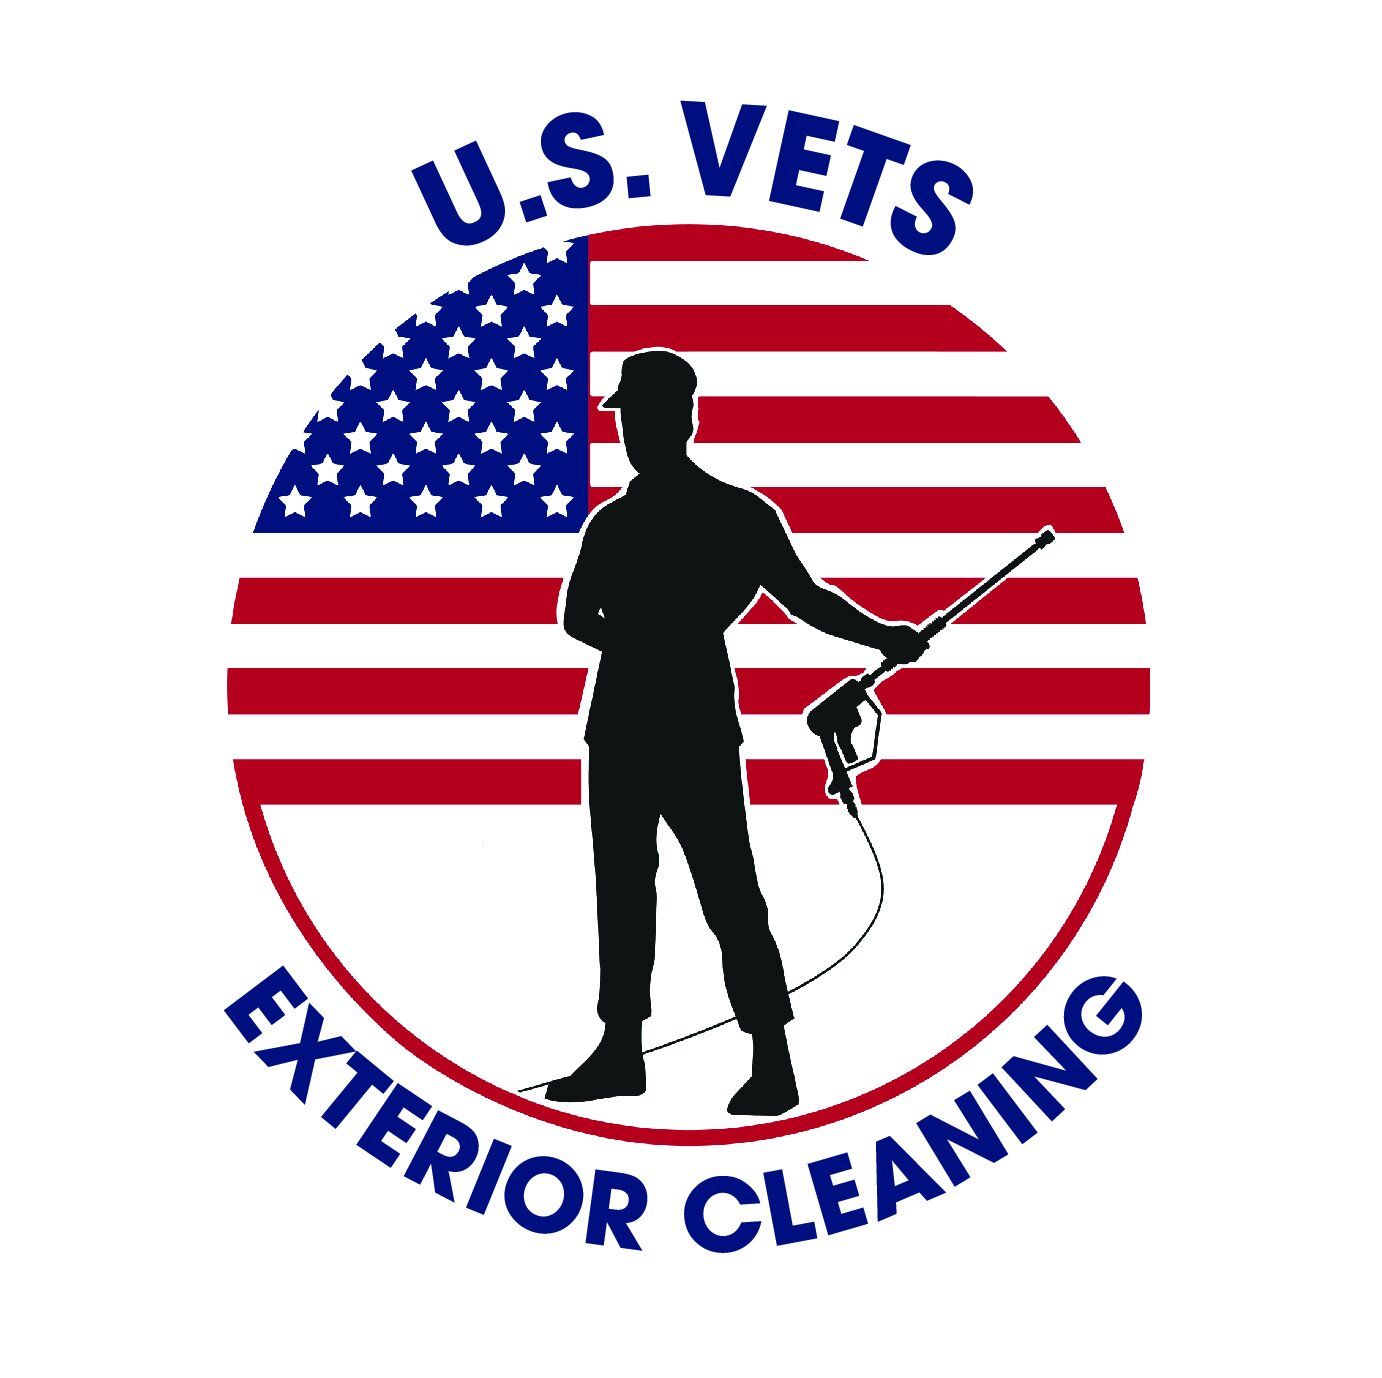 U.S. Vets Exterior Cleaning